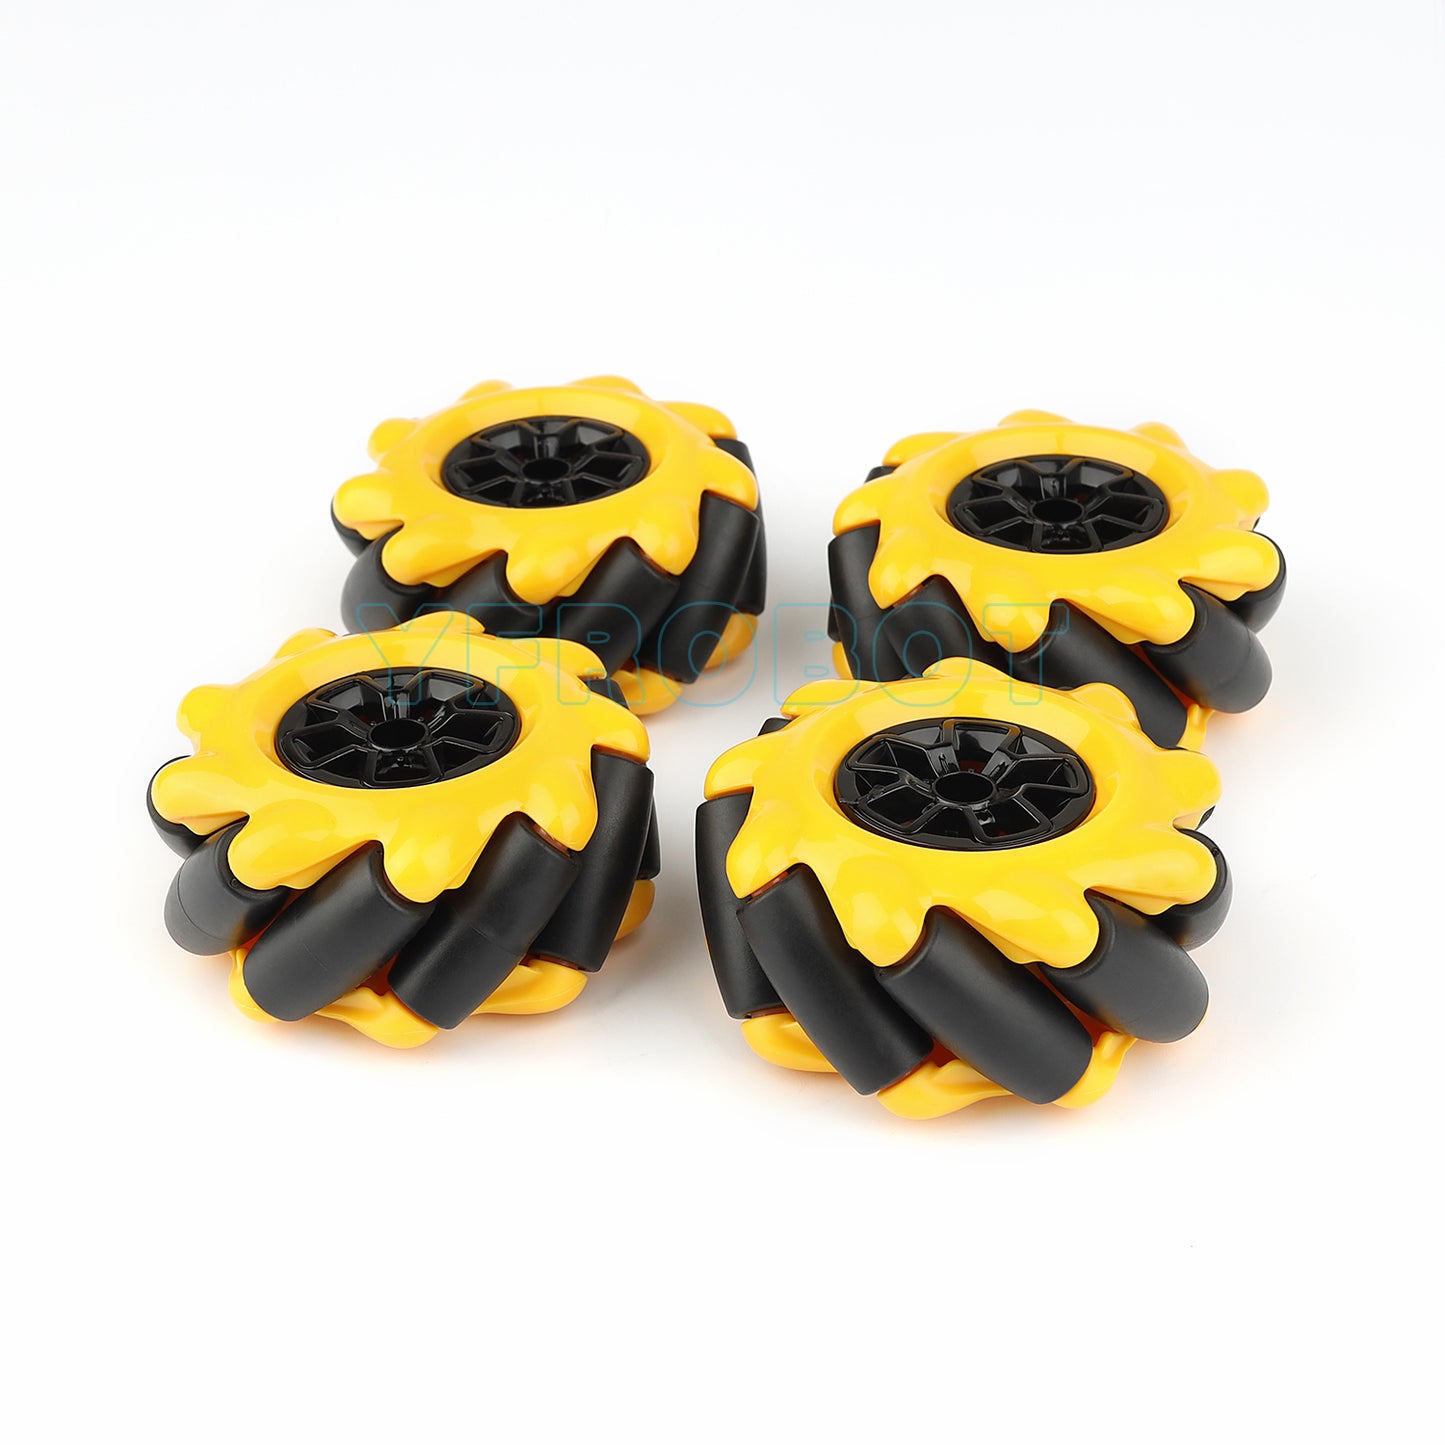 YFROBOT Plastic Mecanum Wheels, 60mm in size, come in a set of four with couplings included.